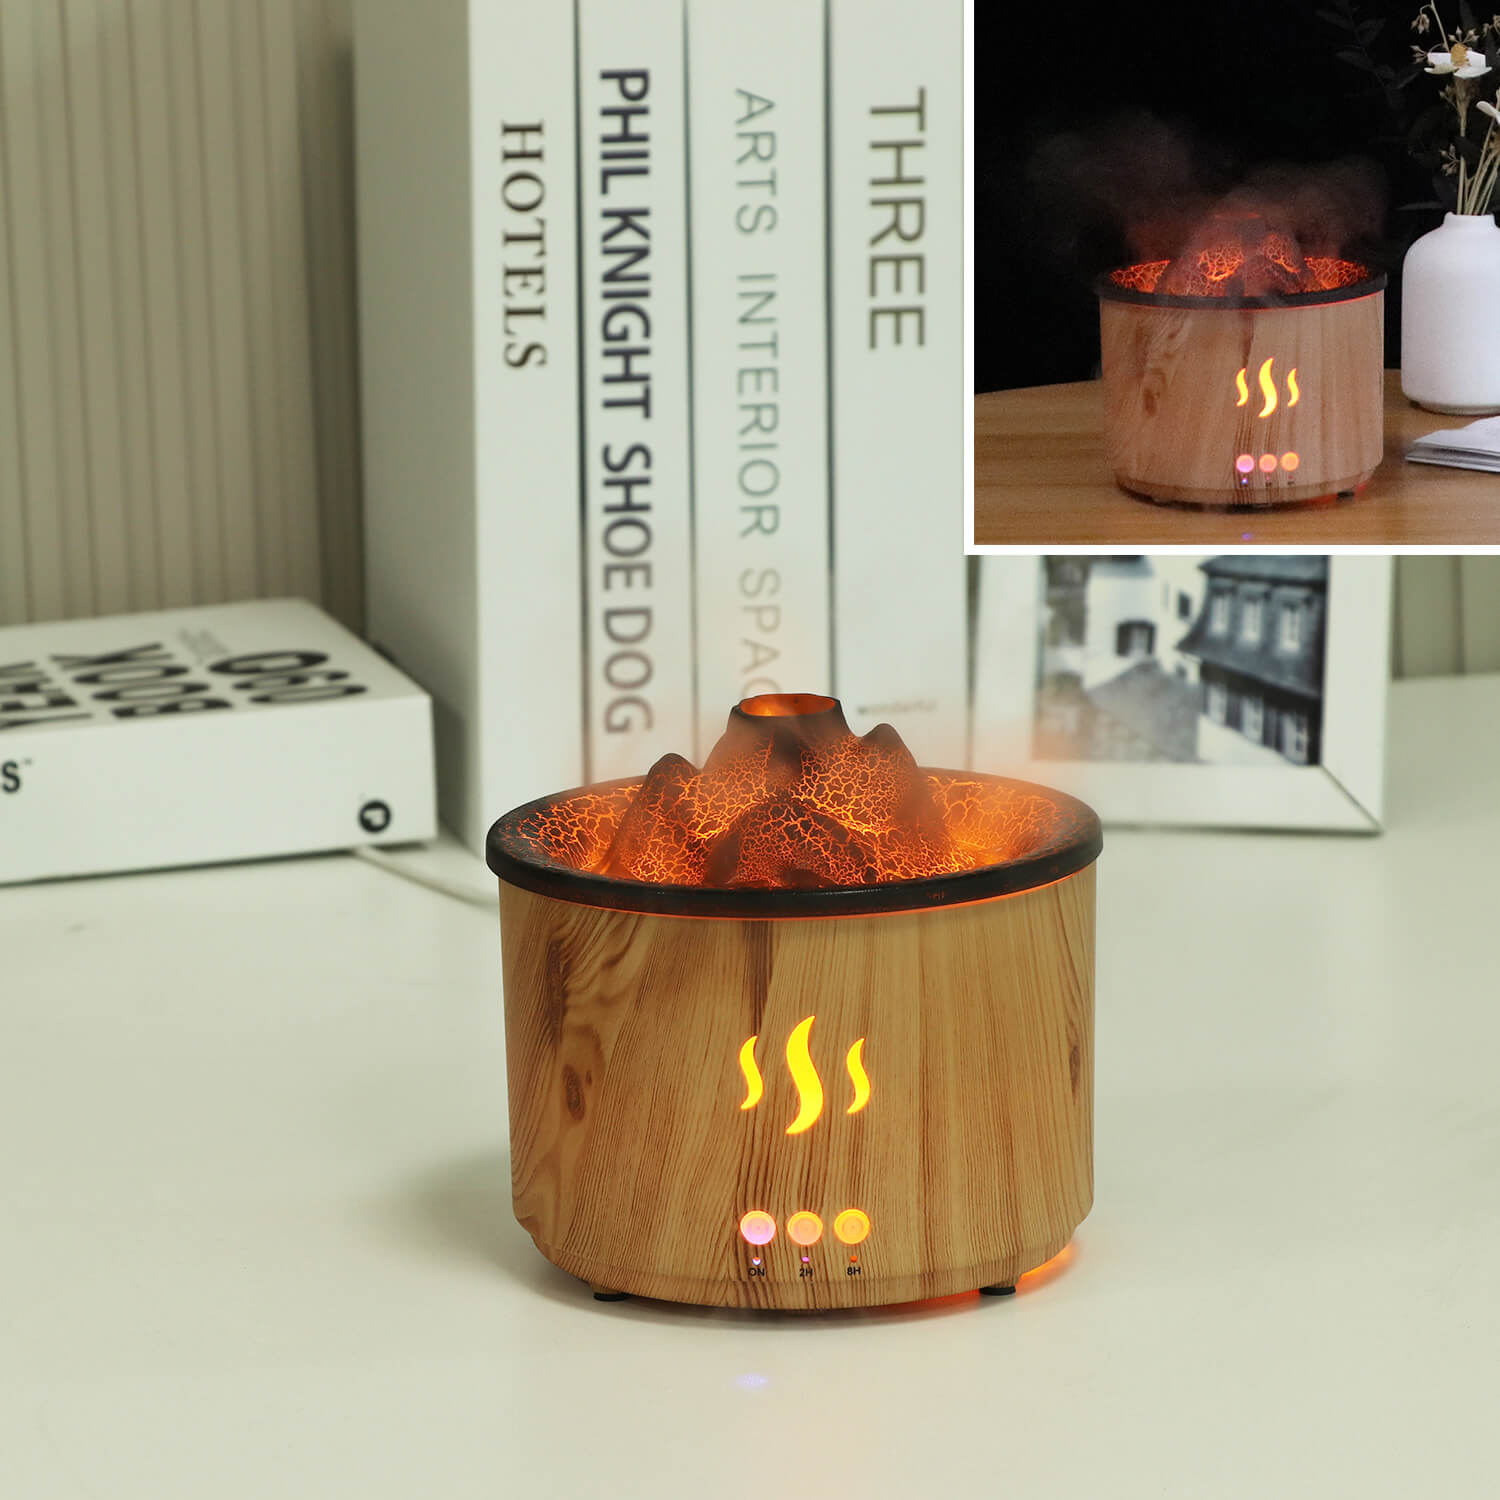 Create the perfect atmosphere with customizable lighting options of our Volcano Aroma Humidifier.